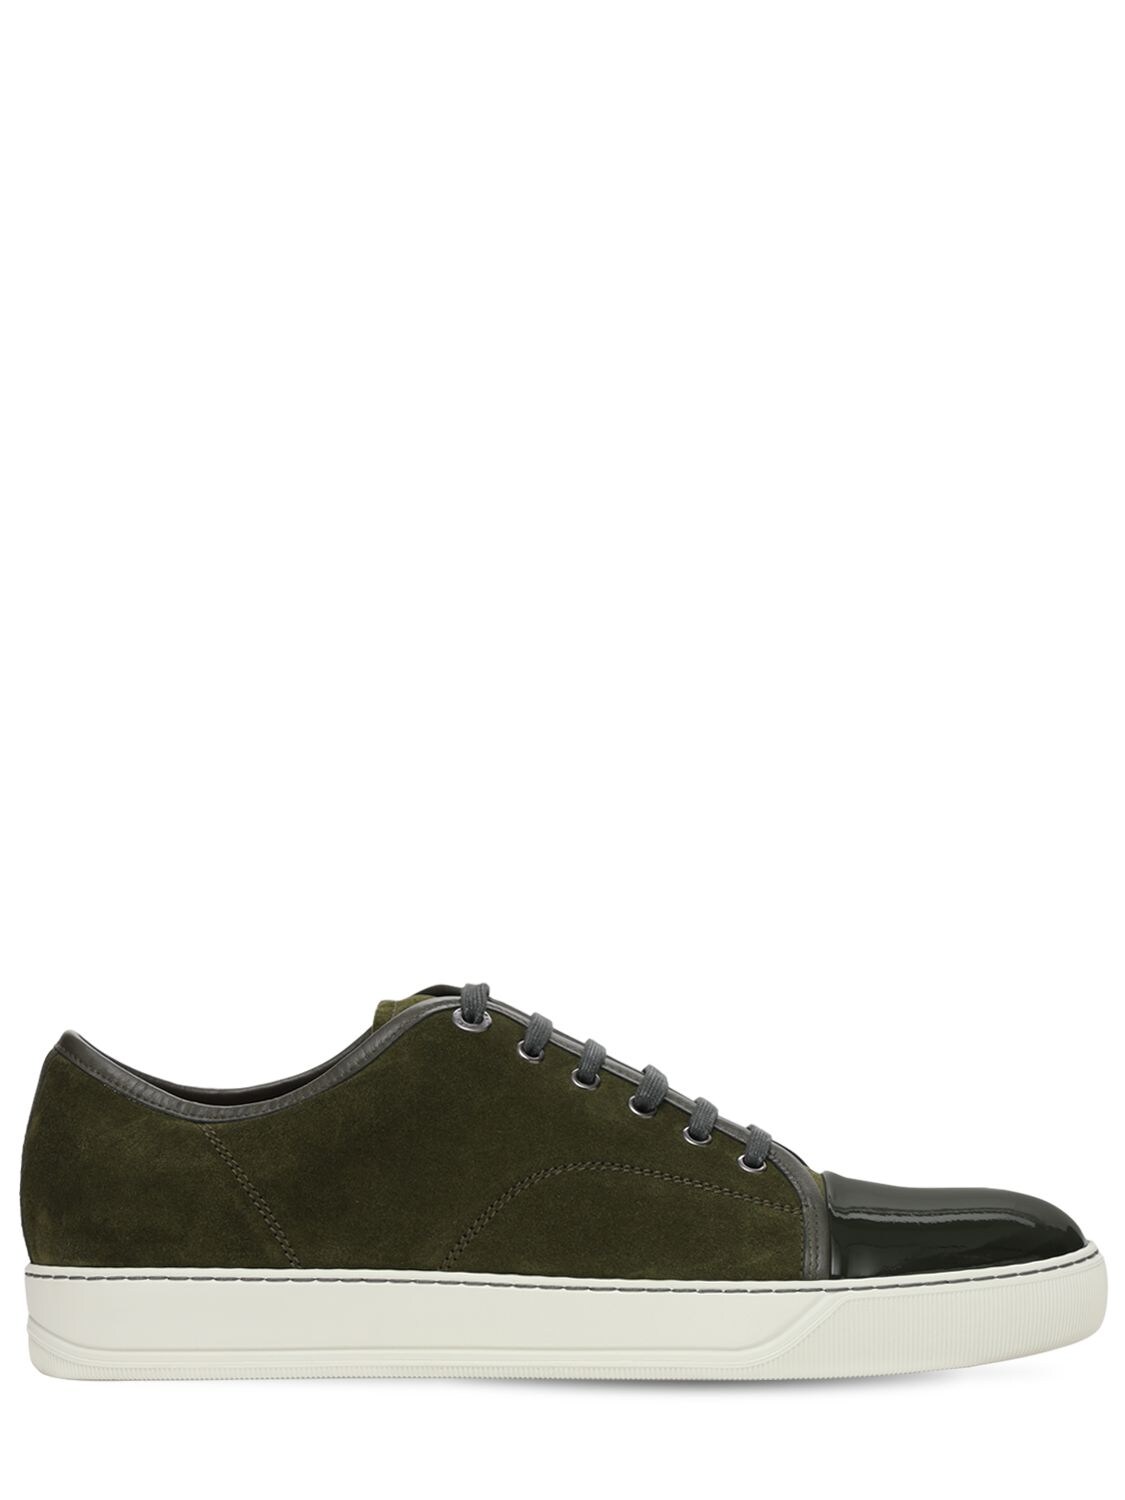 LANVIN LEATHER & SUEDE trainers,73IG0F003-NDC1